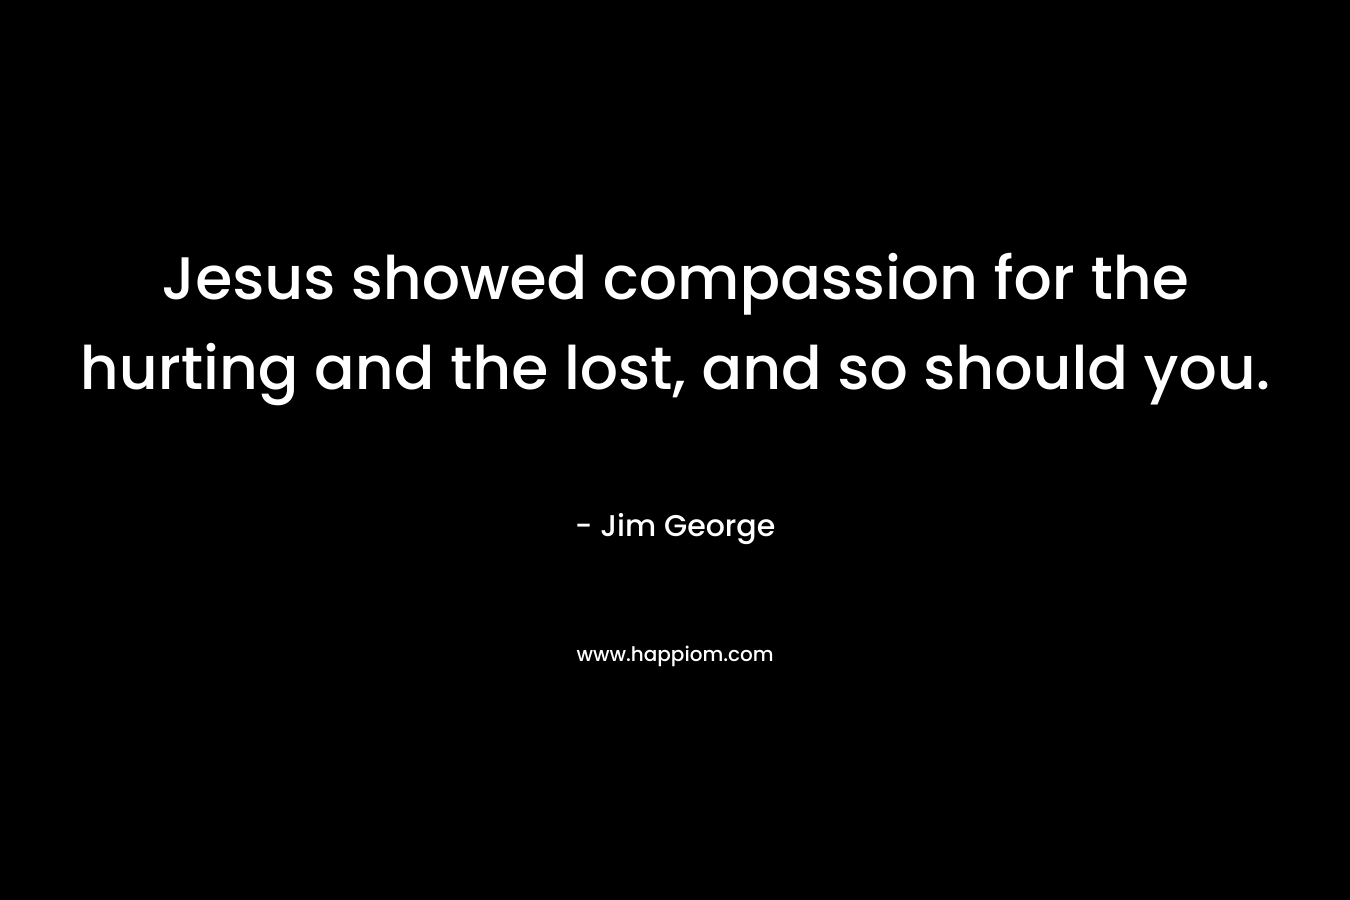 Jesus showed compassion for the hurting and the lost, and so should you.